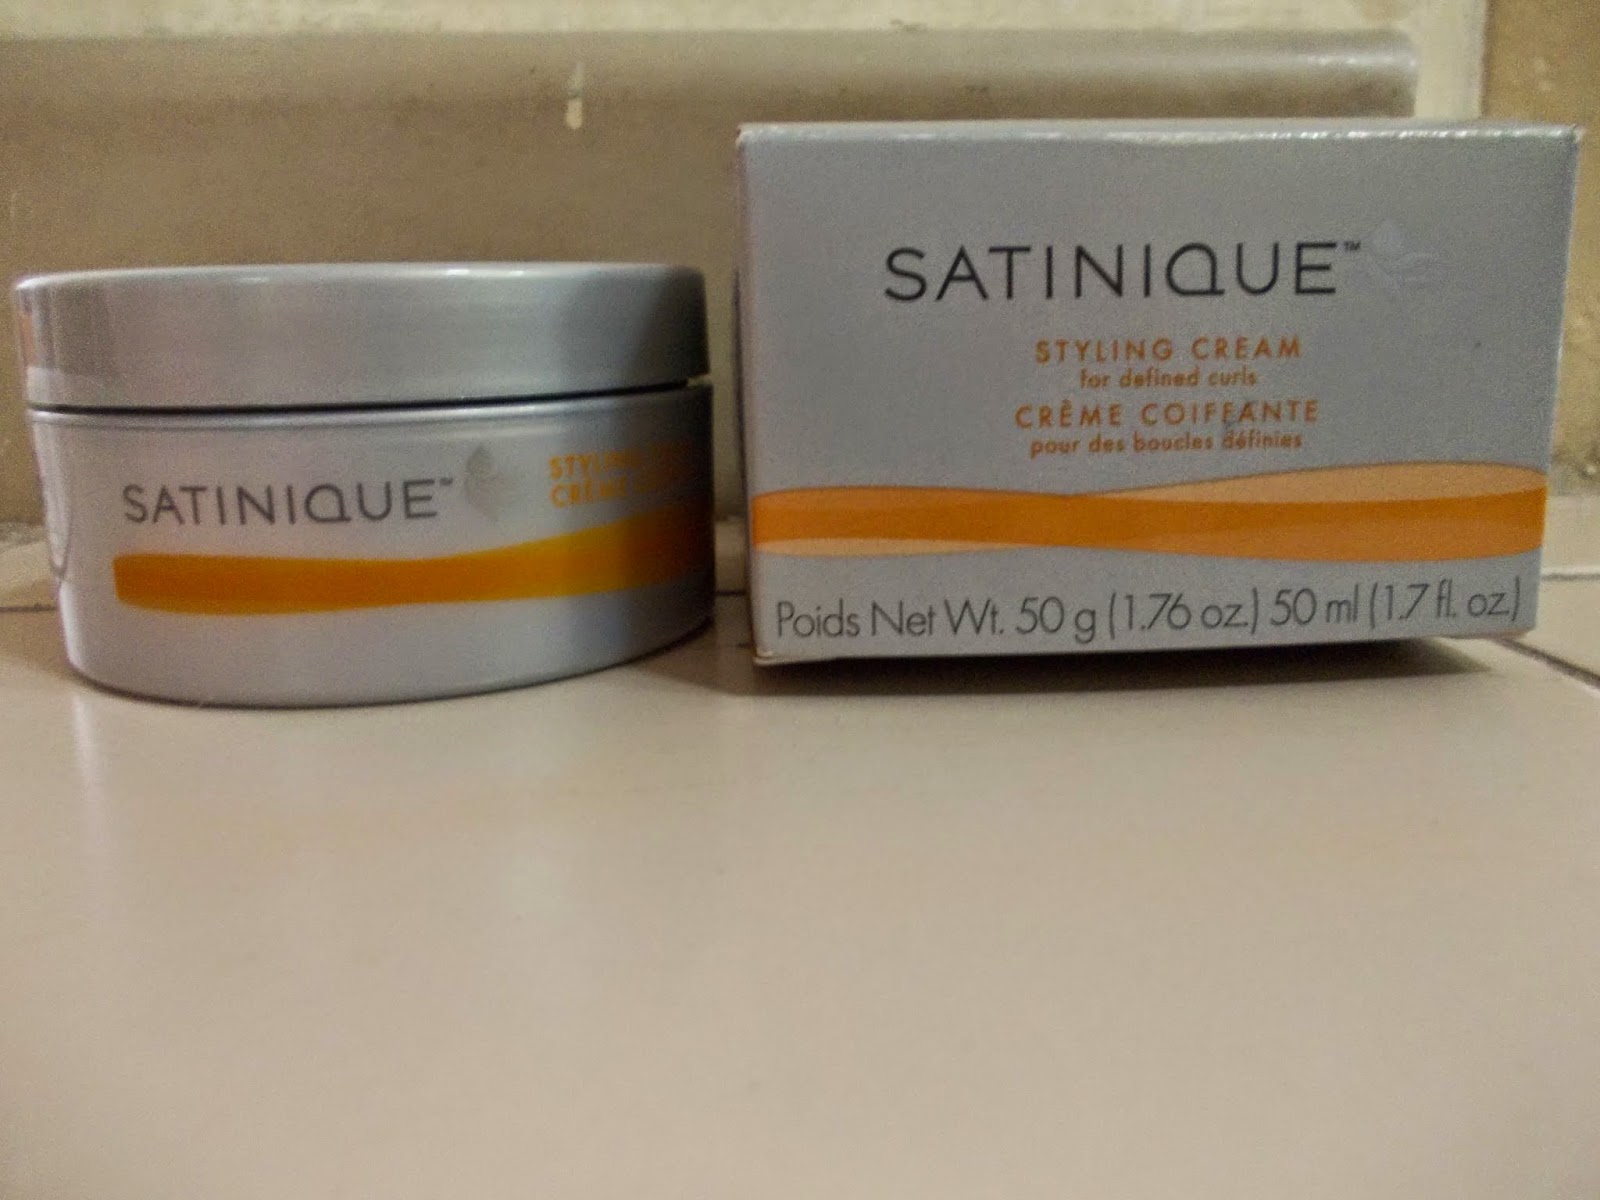 Jasmine's Reviews@BeASmartBeauty : AMWAY SATINIQUE HAIR PRODUCTS REVIEW :)